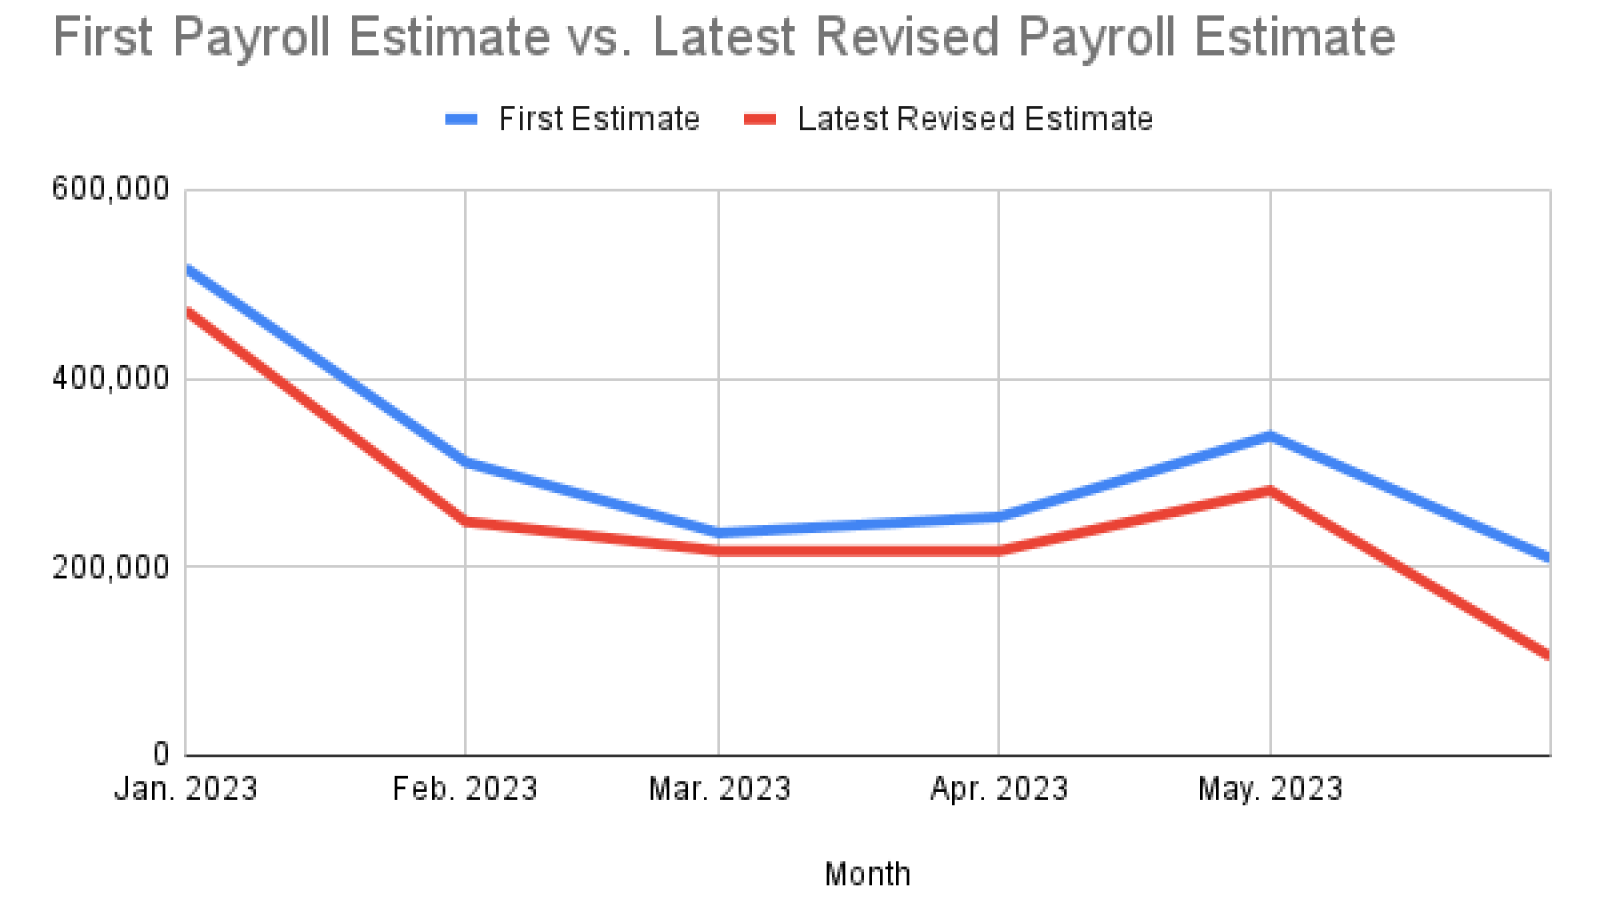 Differences in payroll estimates, Jan. 2023 - June 2023